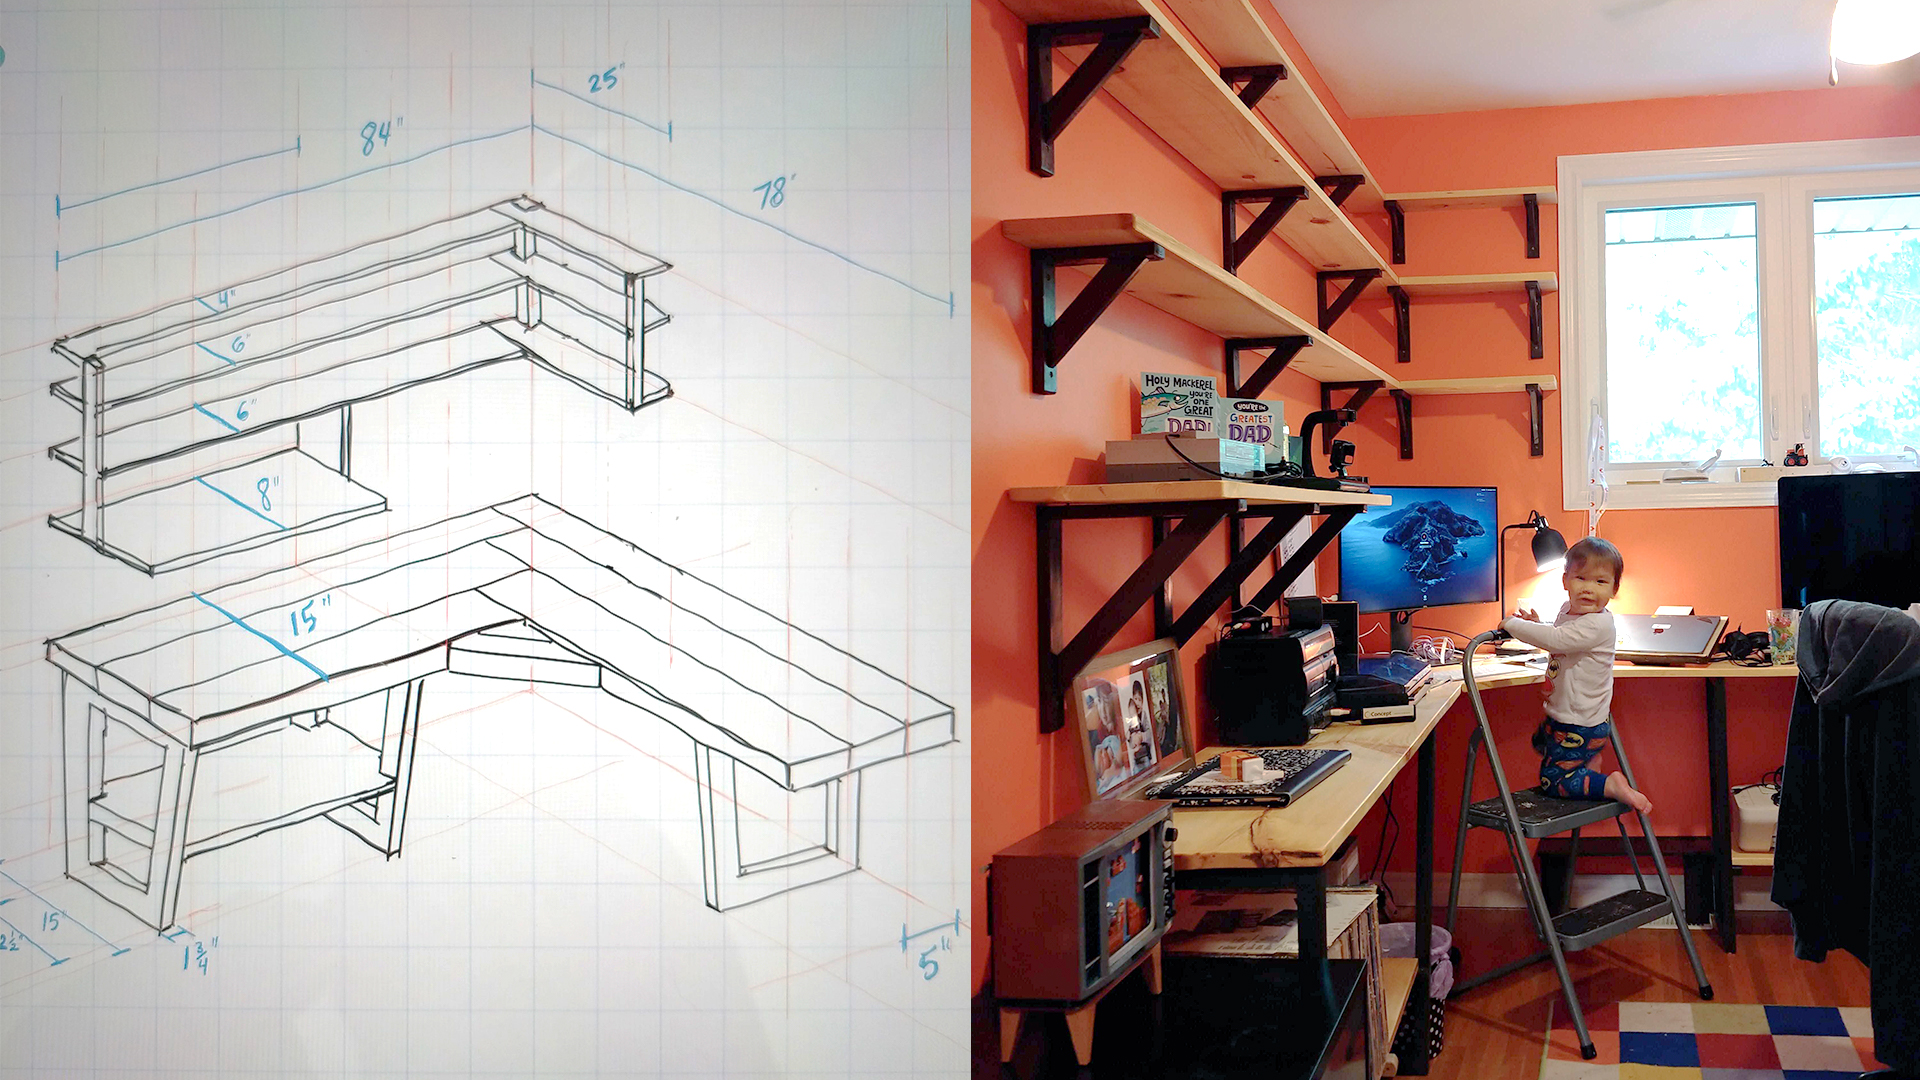 early sketch of a desk and shelves next to the finished install